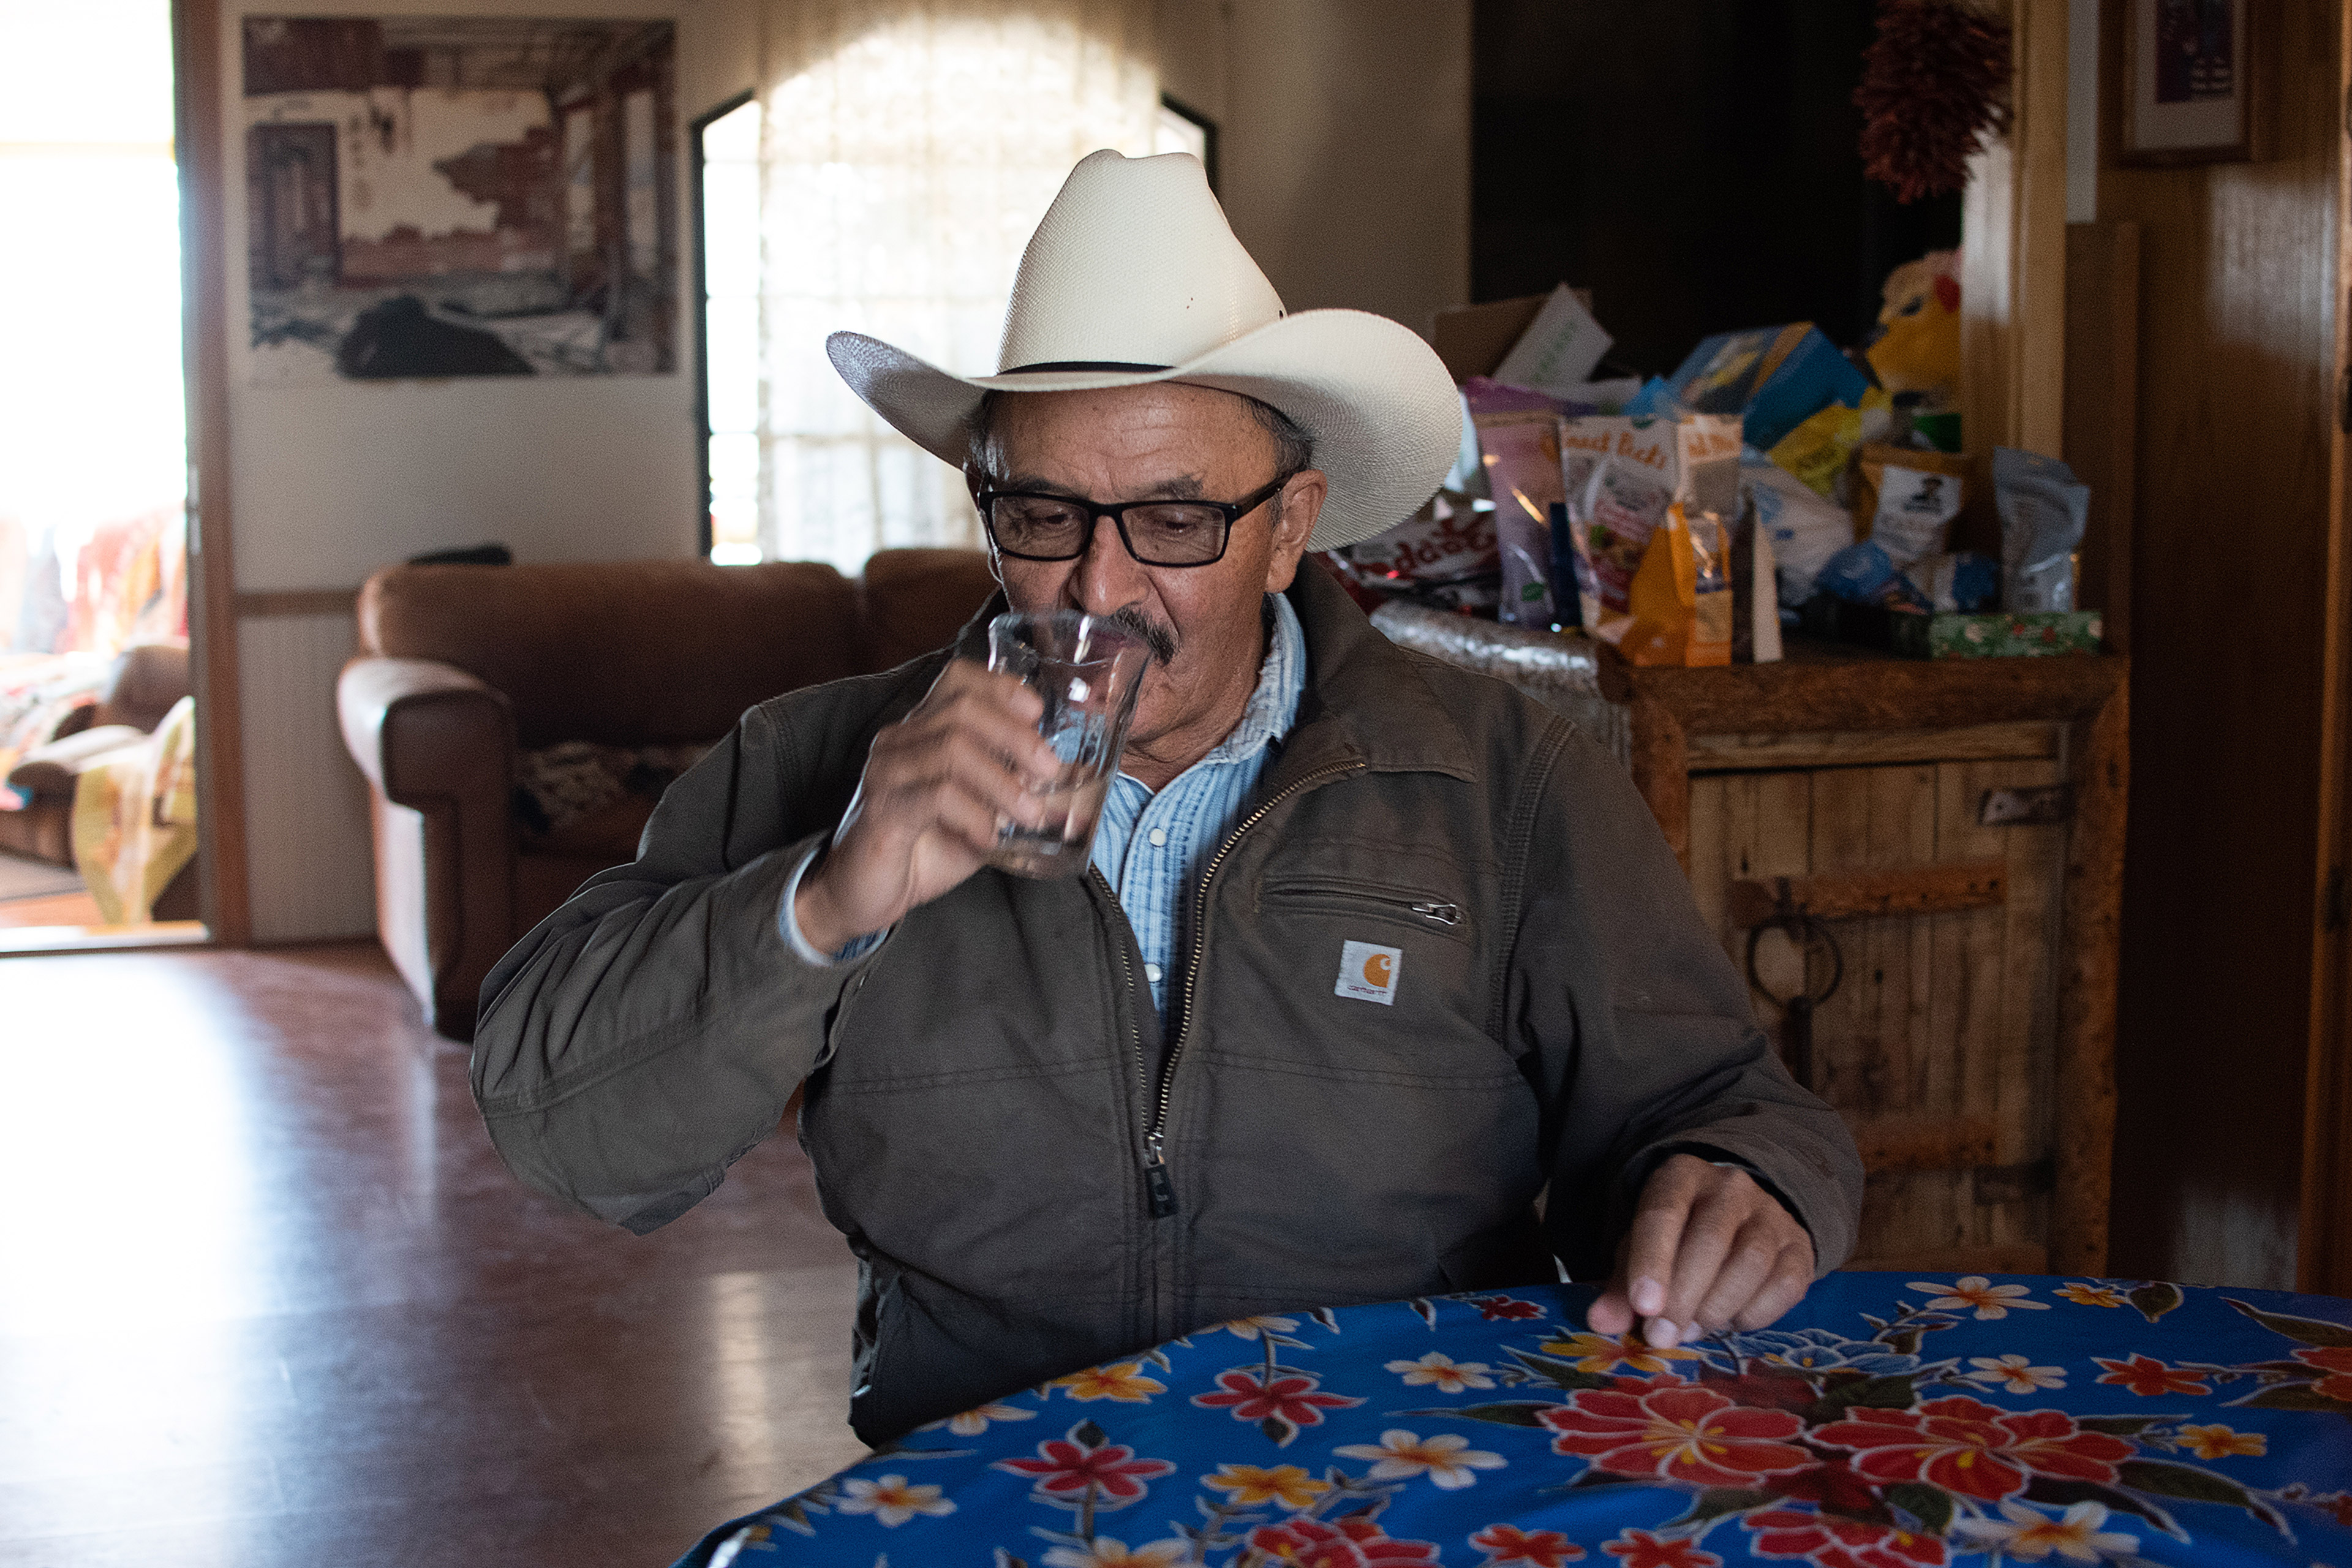 A photo of John Mestas drinking a glass of water at a table indoors.